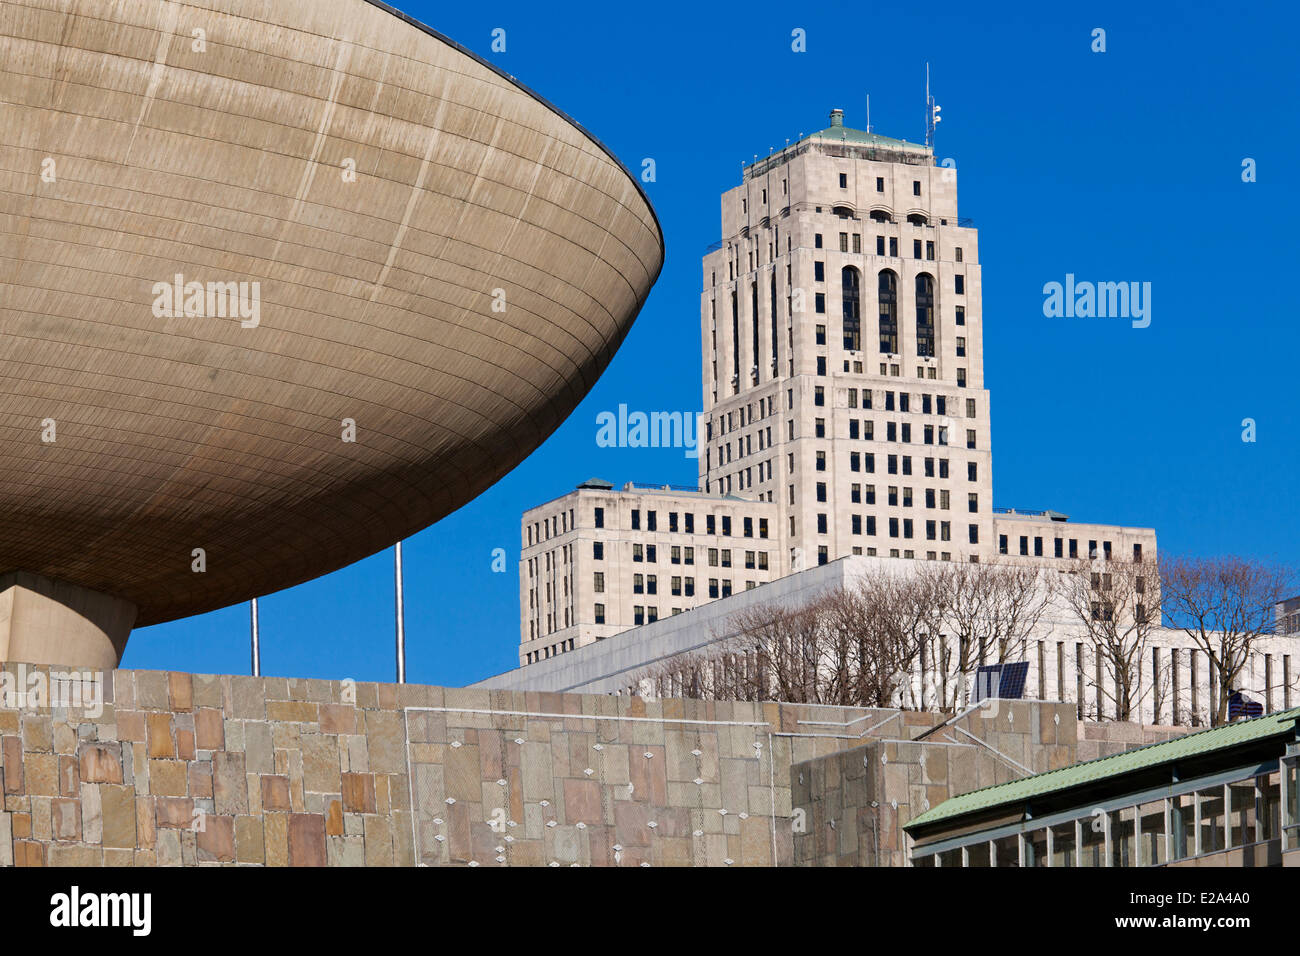 United States, New York state, Albany, the state capital, Capitol Hill, Empire State Plaza, The Egg, Center for the Performing Stock Photo